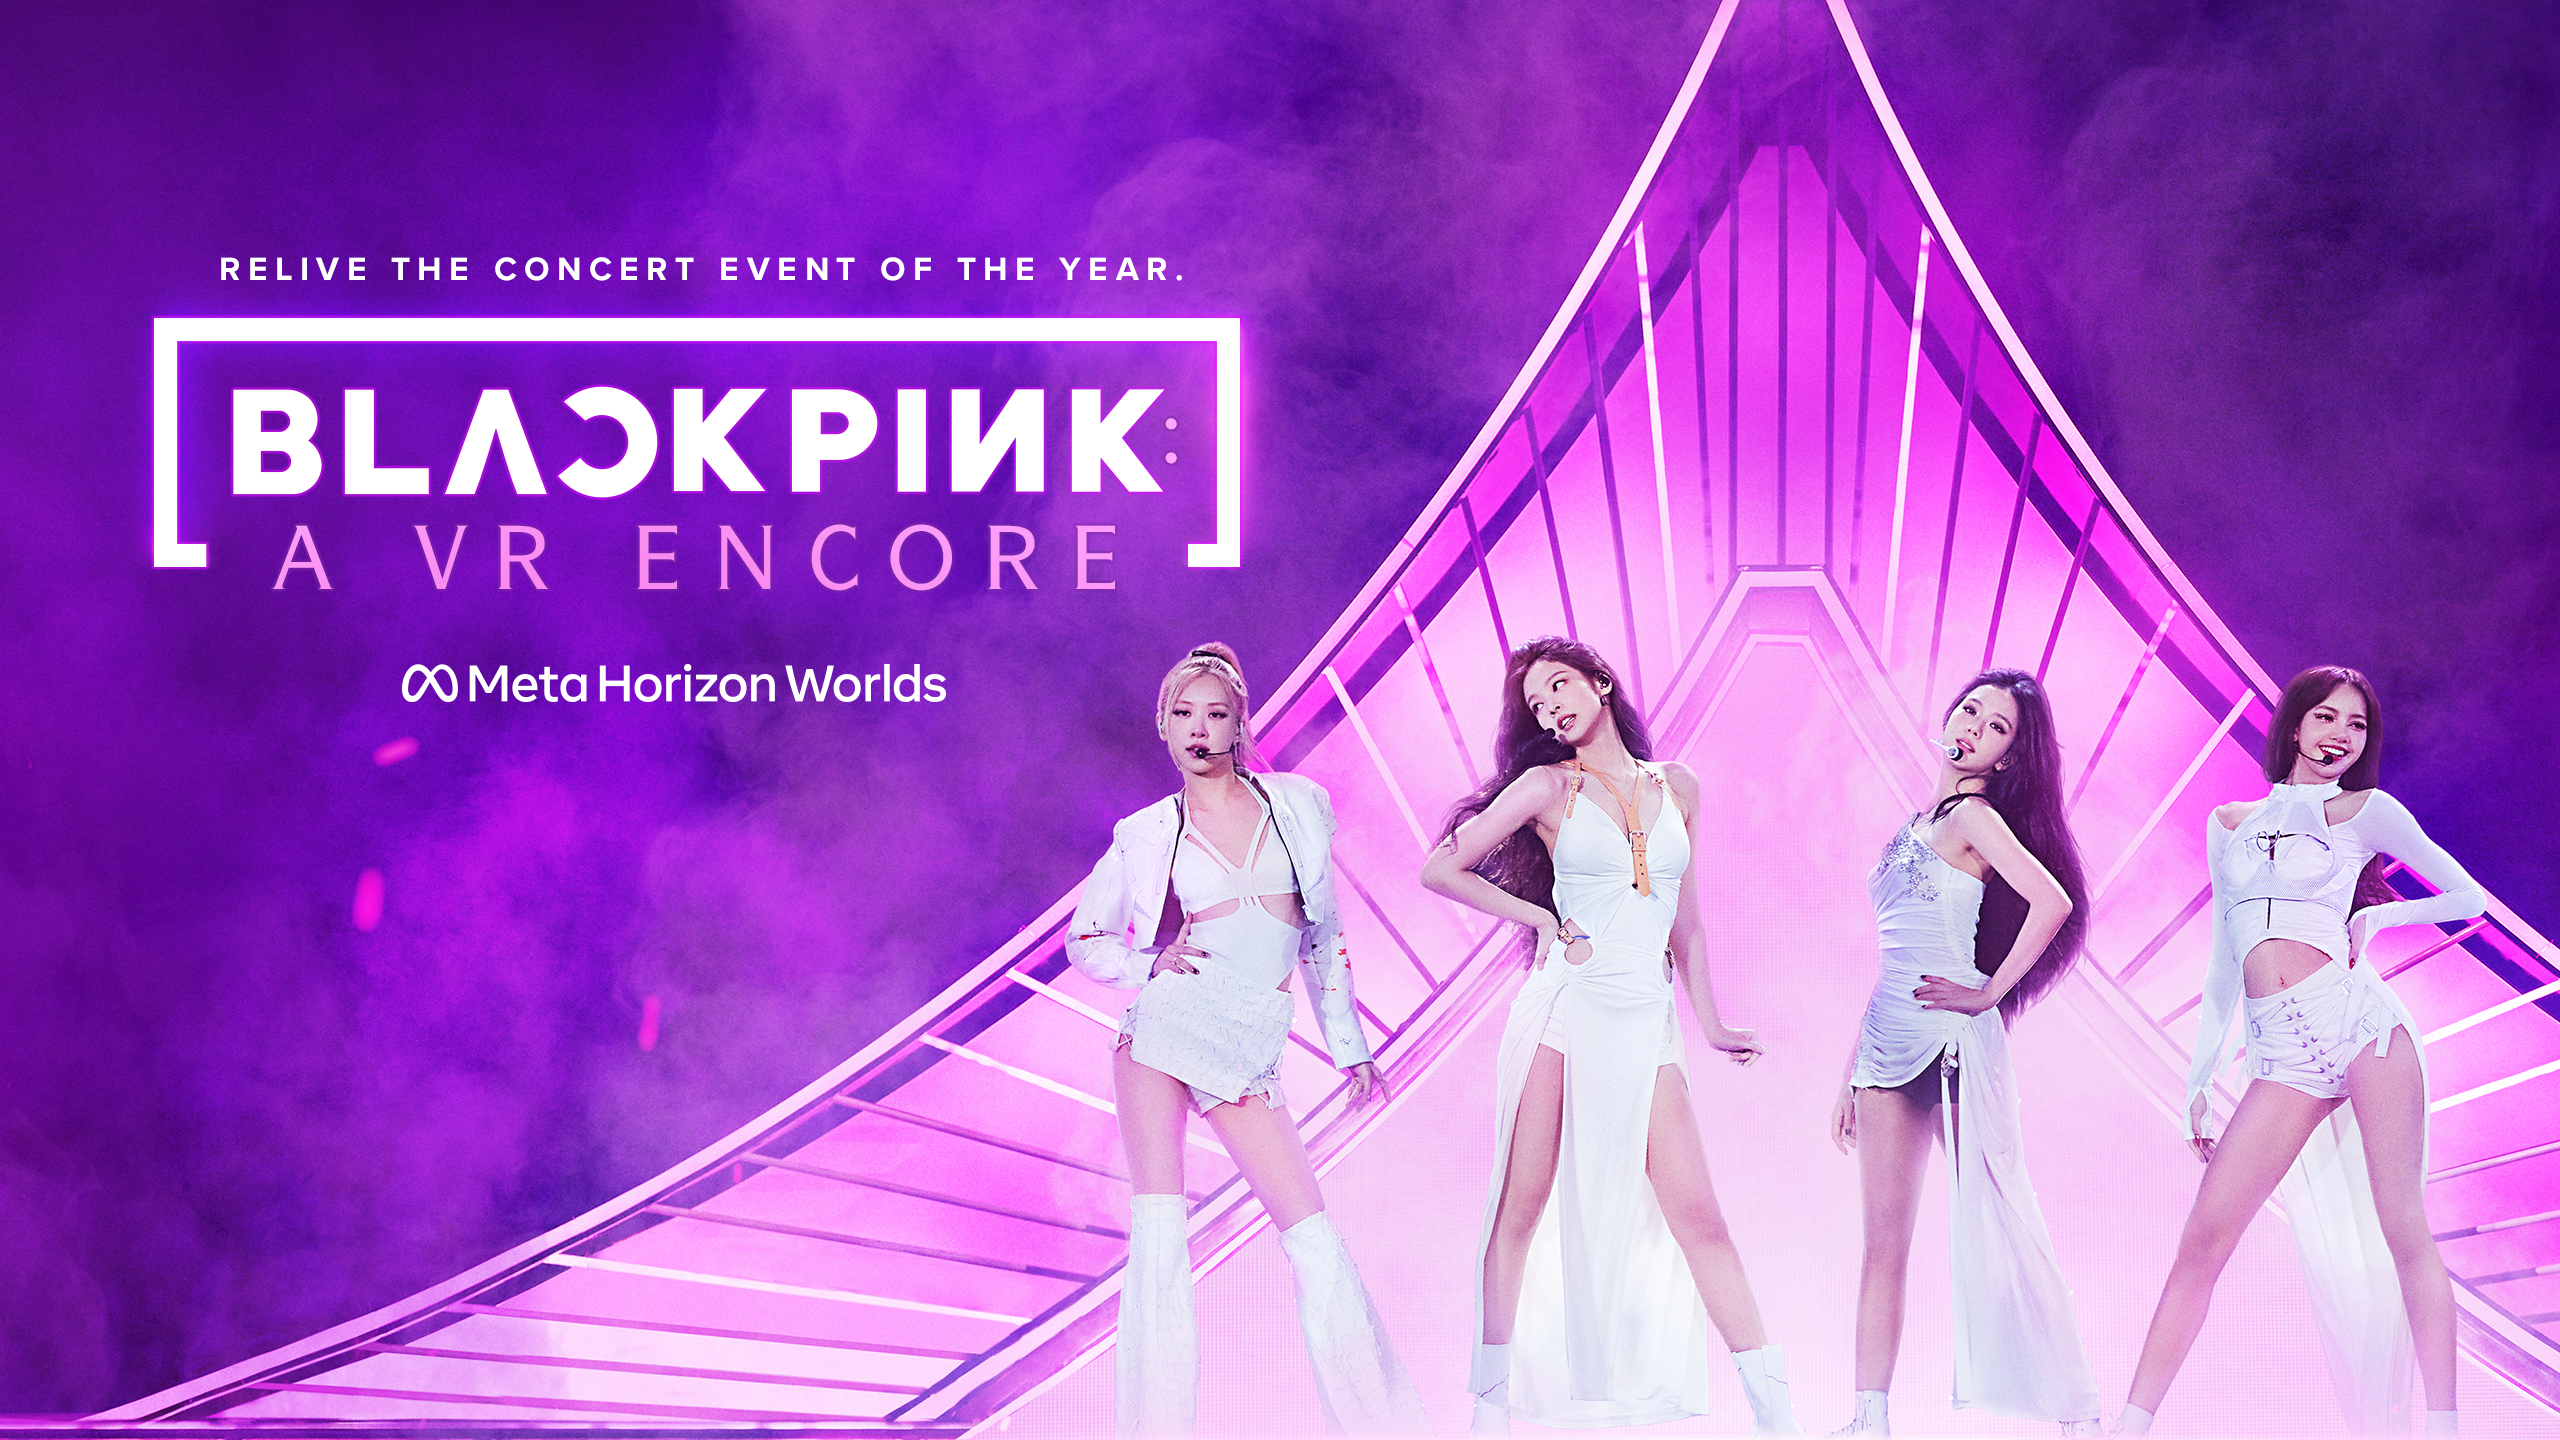 BlackPink is performing a free VR concert for Meta Quest 3 and Oculus Quest 2 owners as a post-Christmas gift